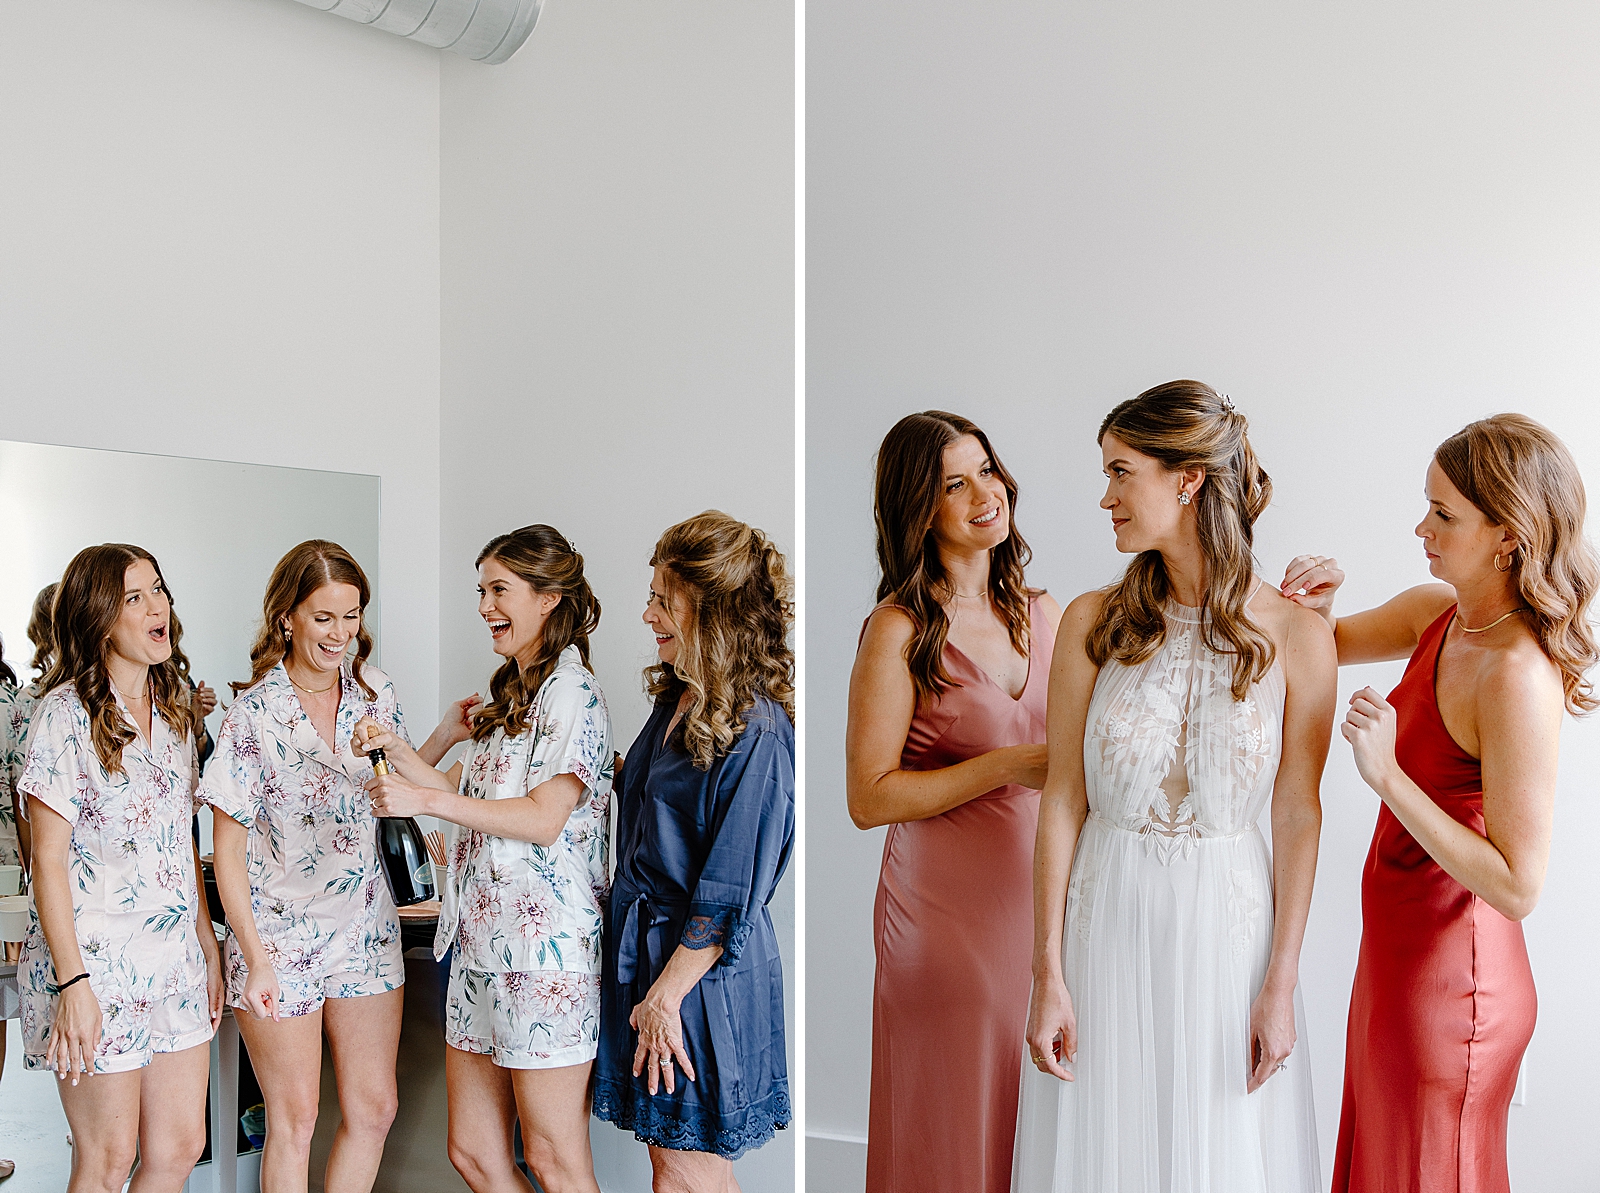 Bride and Bridesmaids before getting ready popping champaignbottle